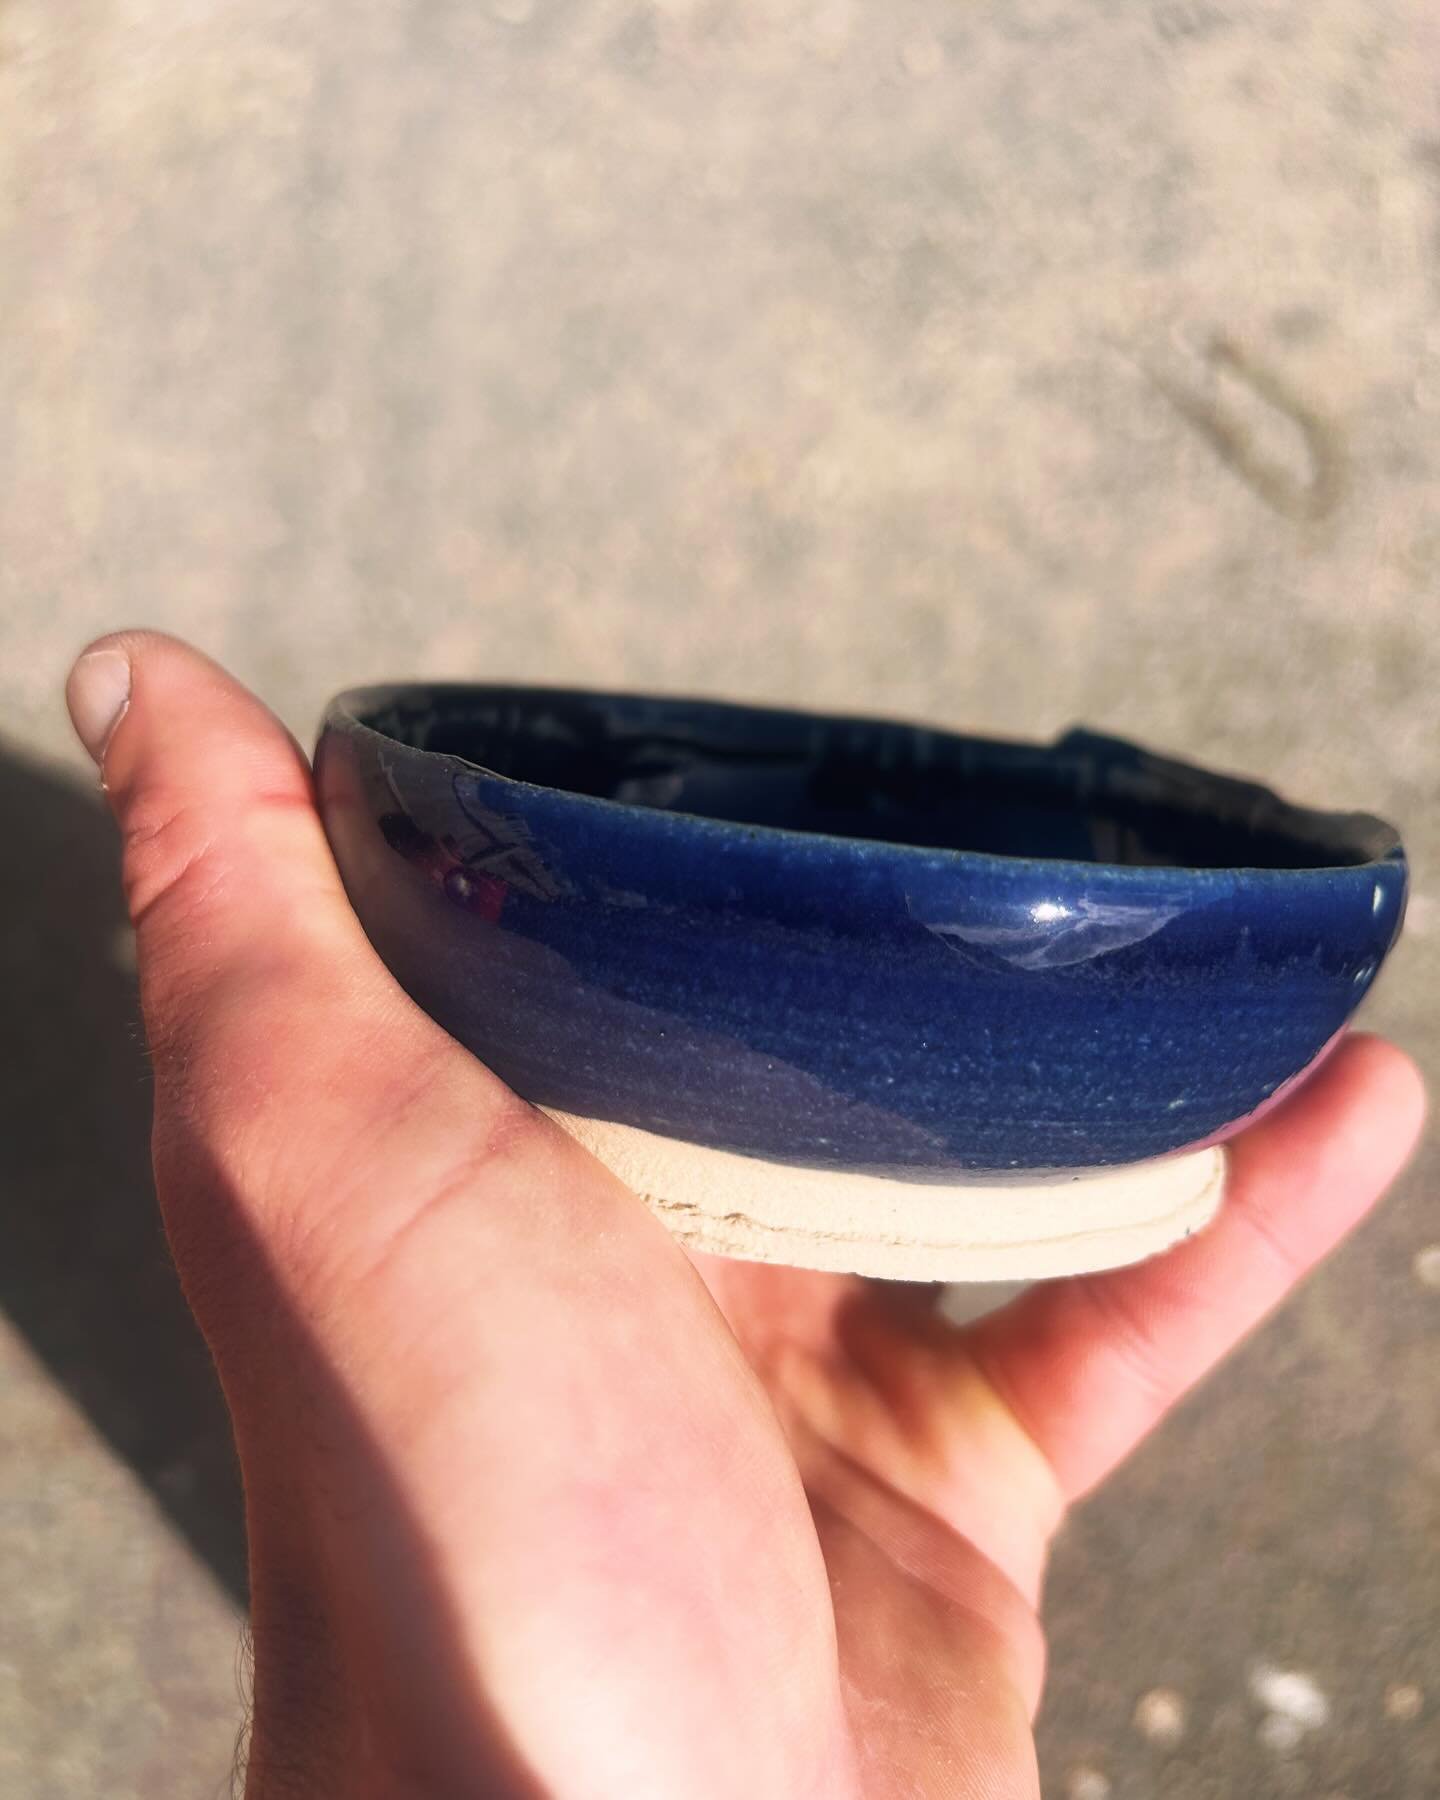 Introducing our house glazes!

Glazing is part art part alchemy and we&rsquo;ve got you covered with our 4 basic glazes. 

1) Blue Monday - a deep dark blue perfect for any occasion 
2) Purple Nurple - this is a fun bright popping purple
3) Green Mac